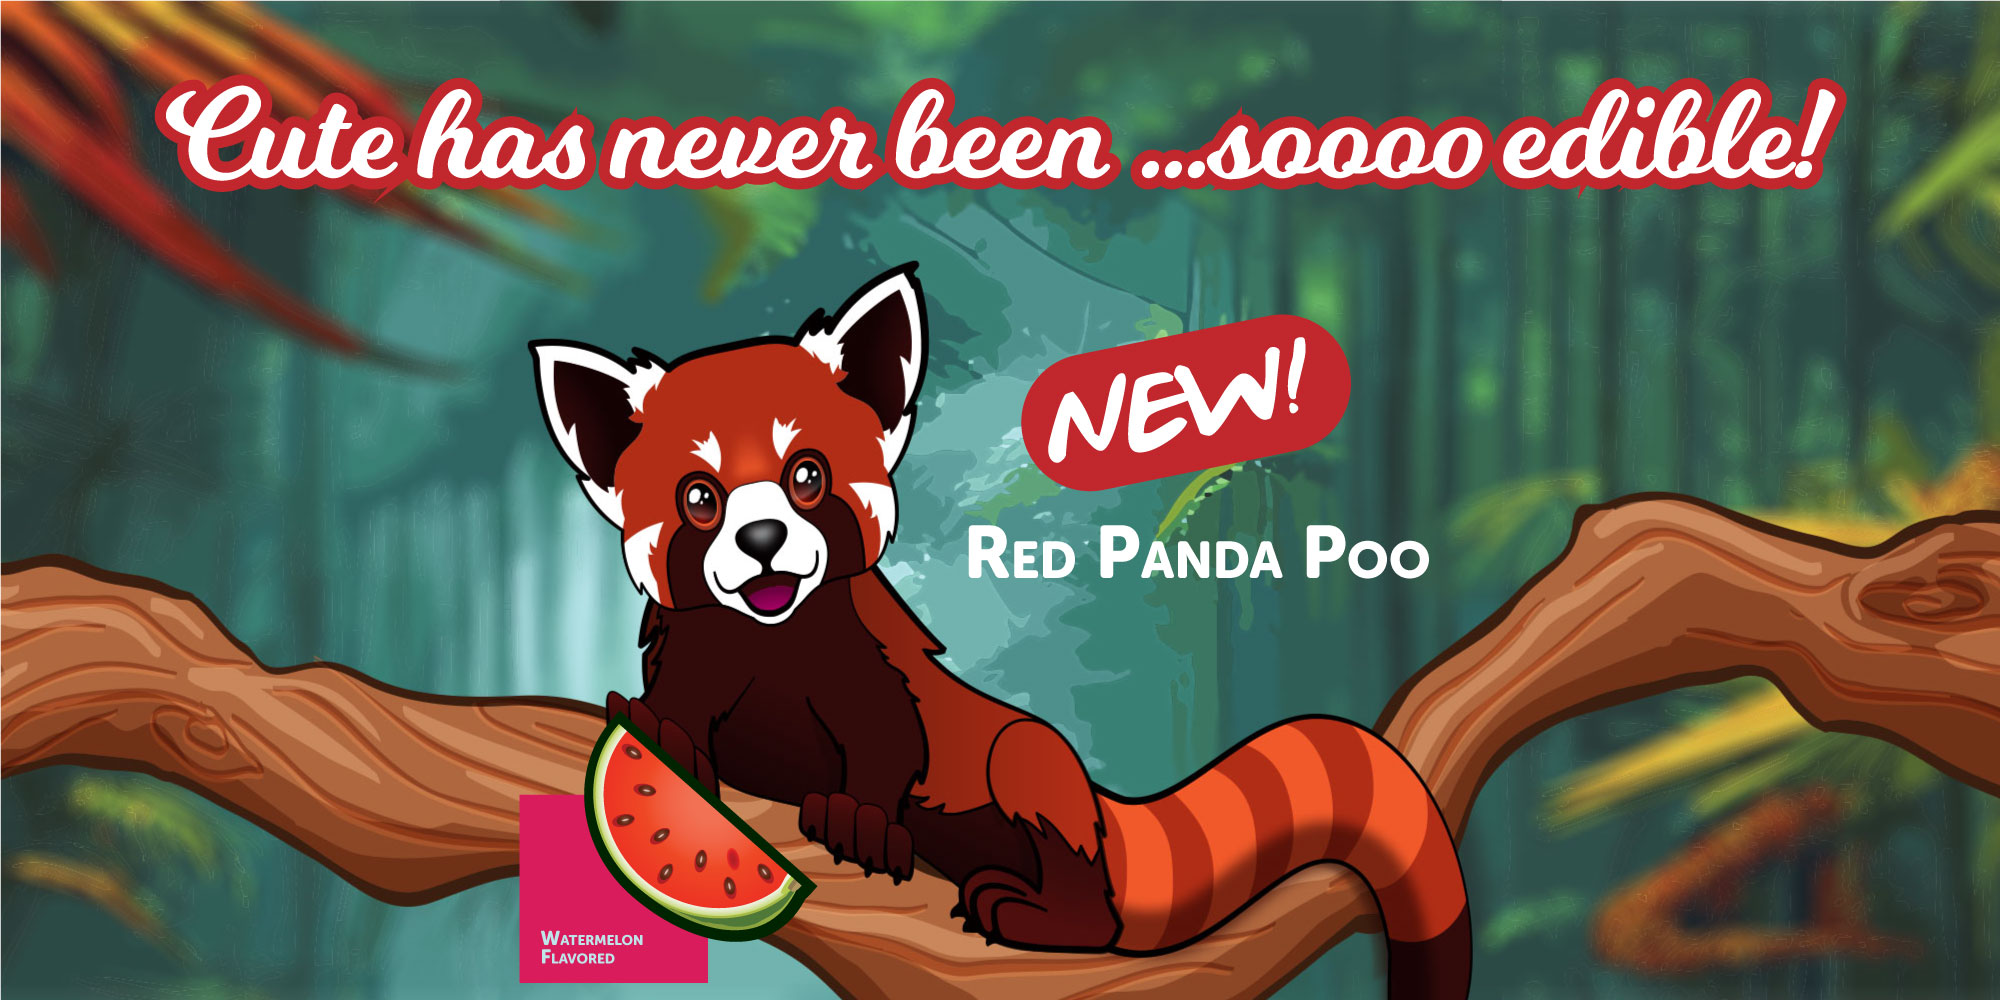 Red Panda Poo sitting on branch new product watermelon flavored